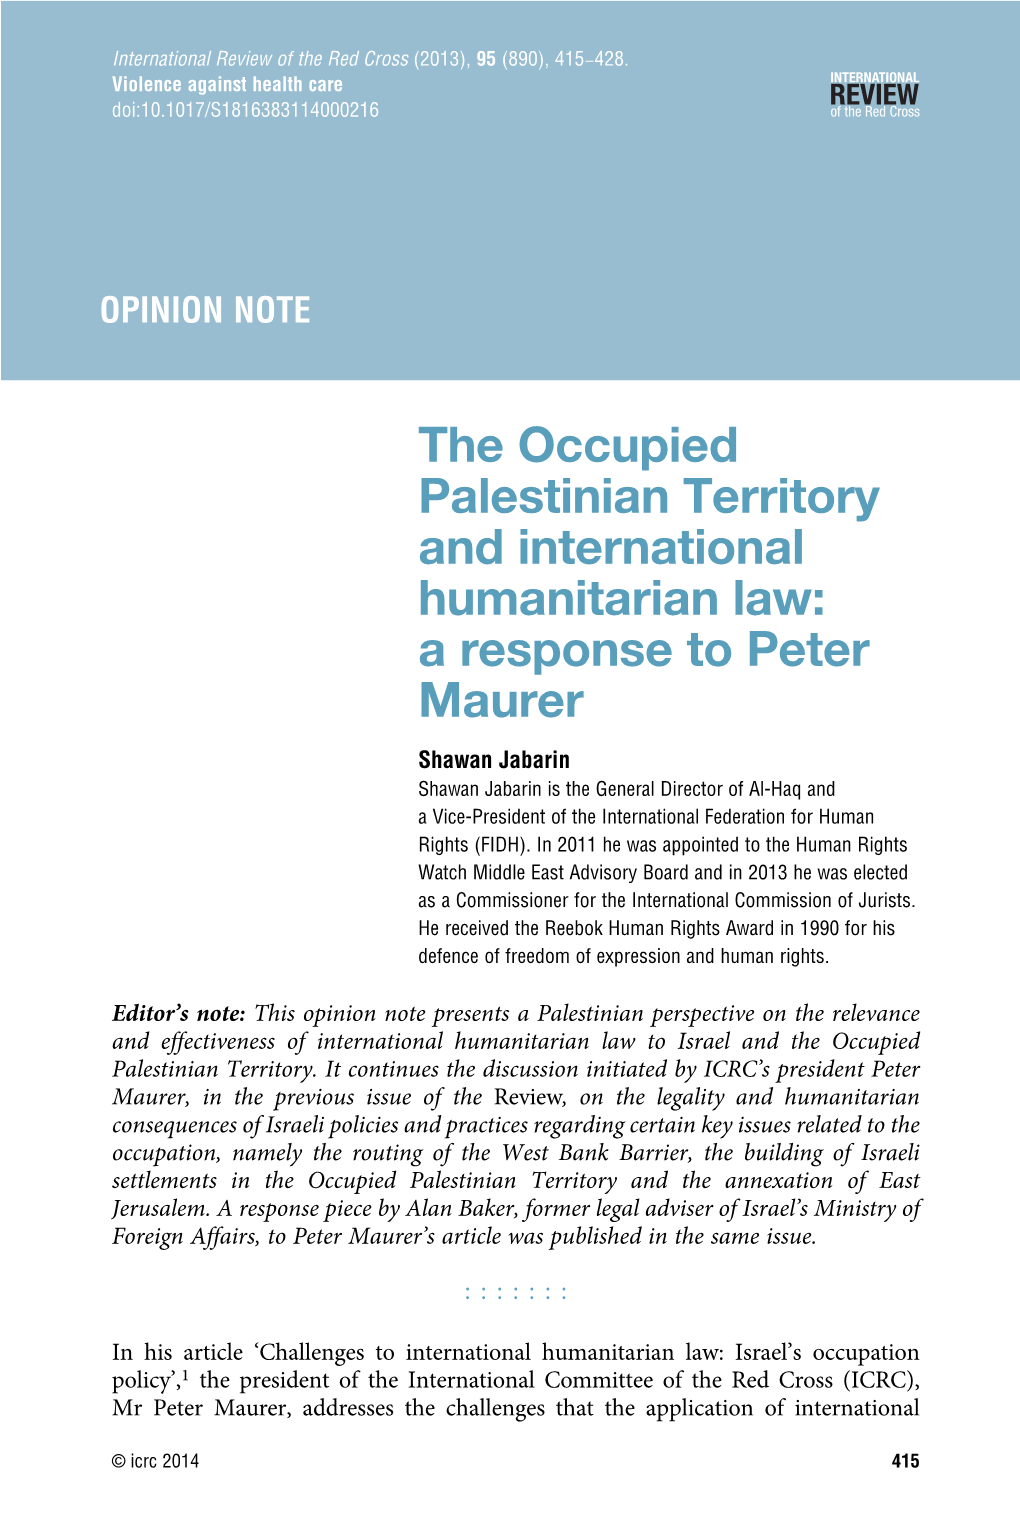 The Occupied Palestinian Territory and International Humanitarian Law: a Response to Peter Maurer